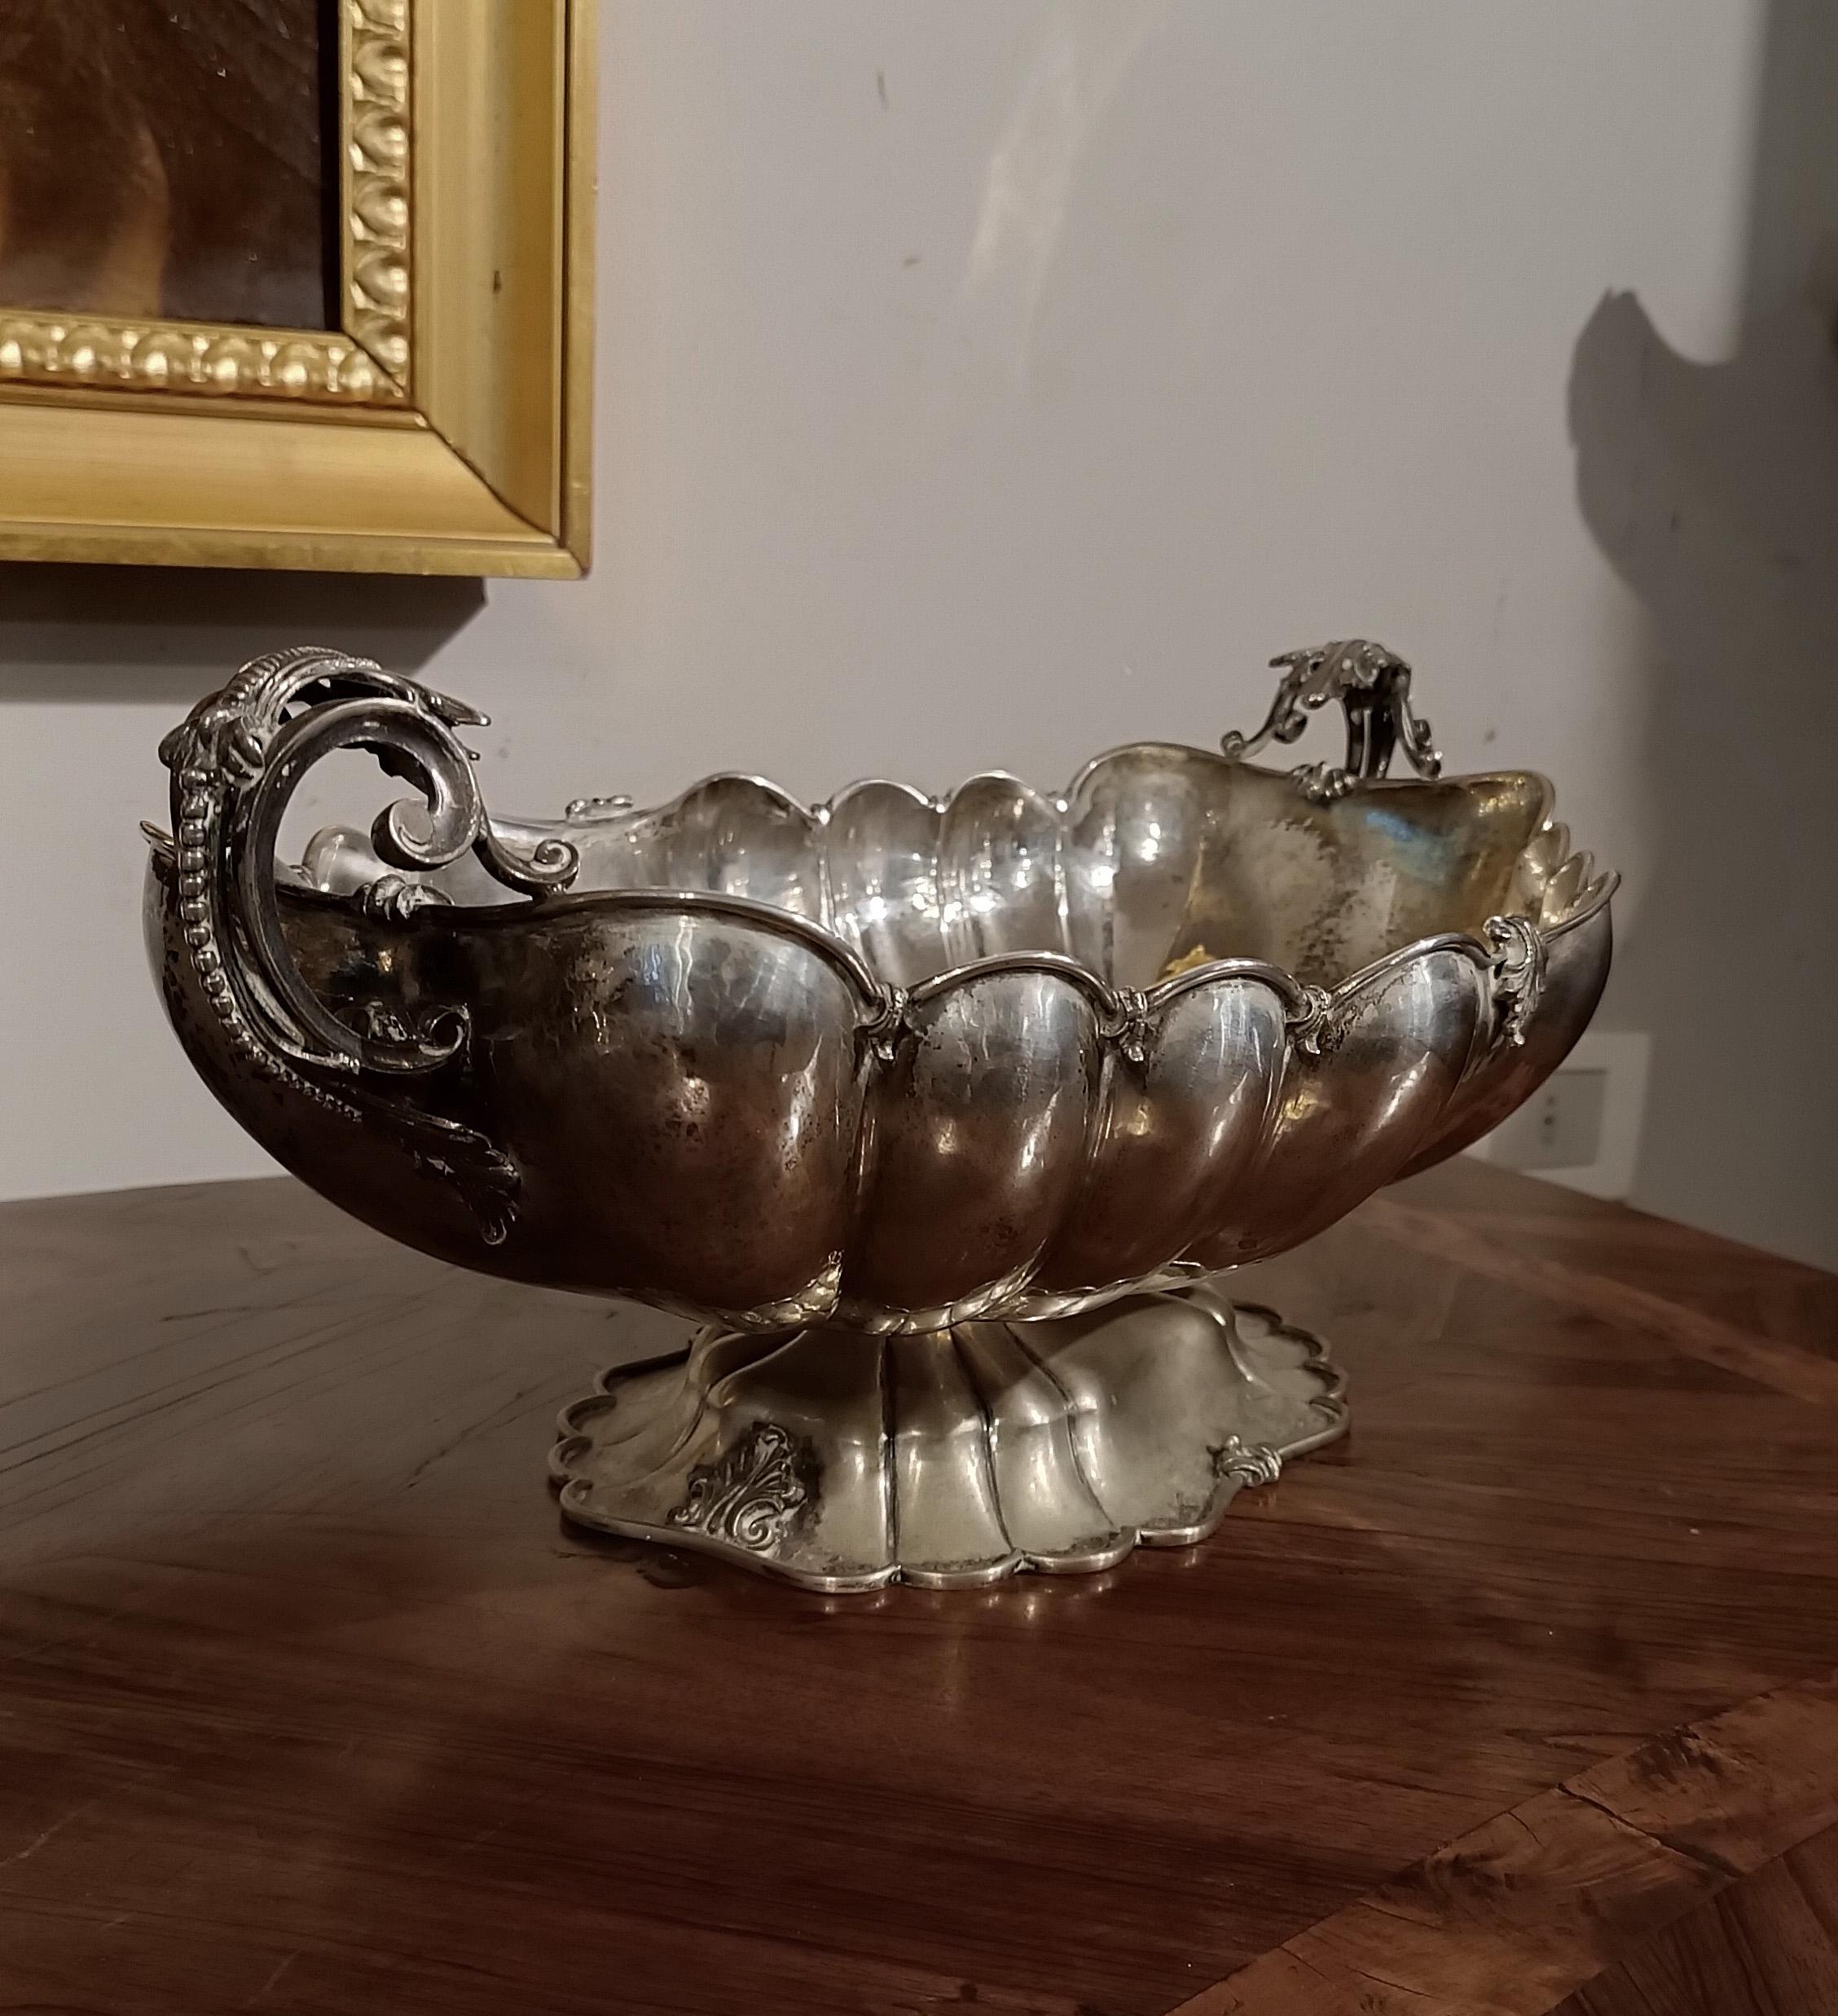 Hand-Crafted LATE 19th-EARLY 20th CENTURY ITALIAN SILVER CENTERPIECE For Sale